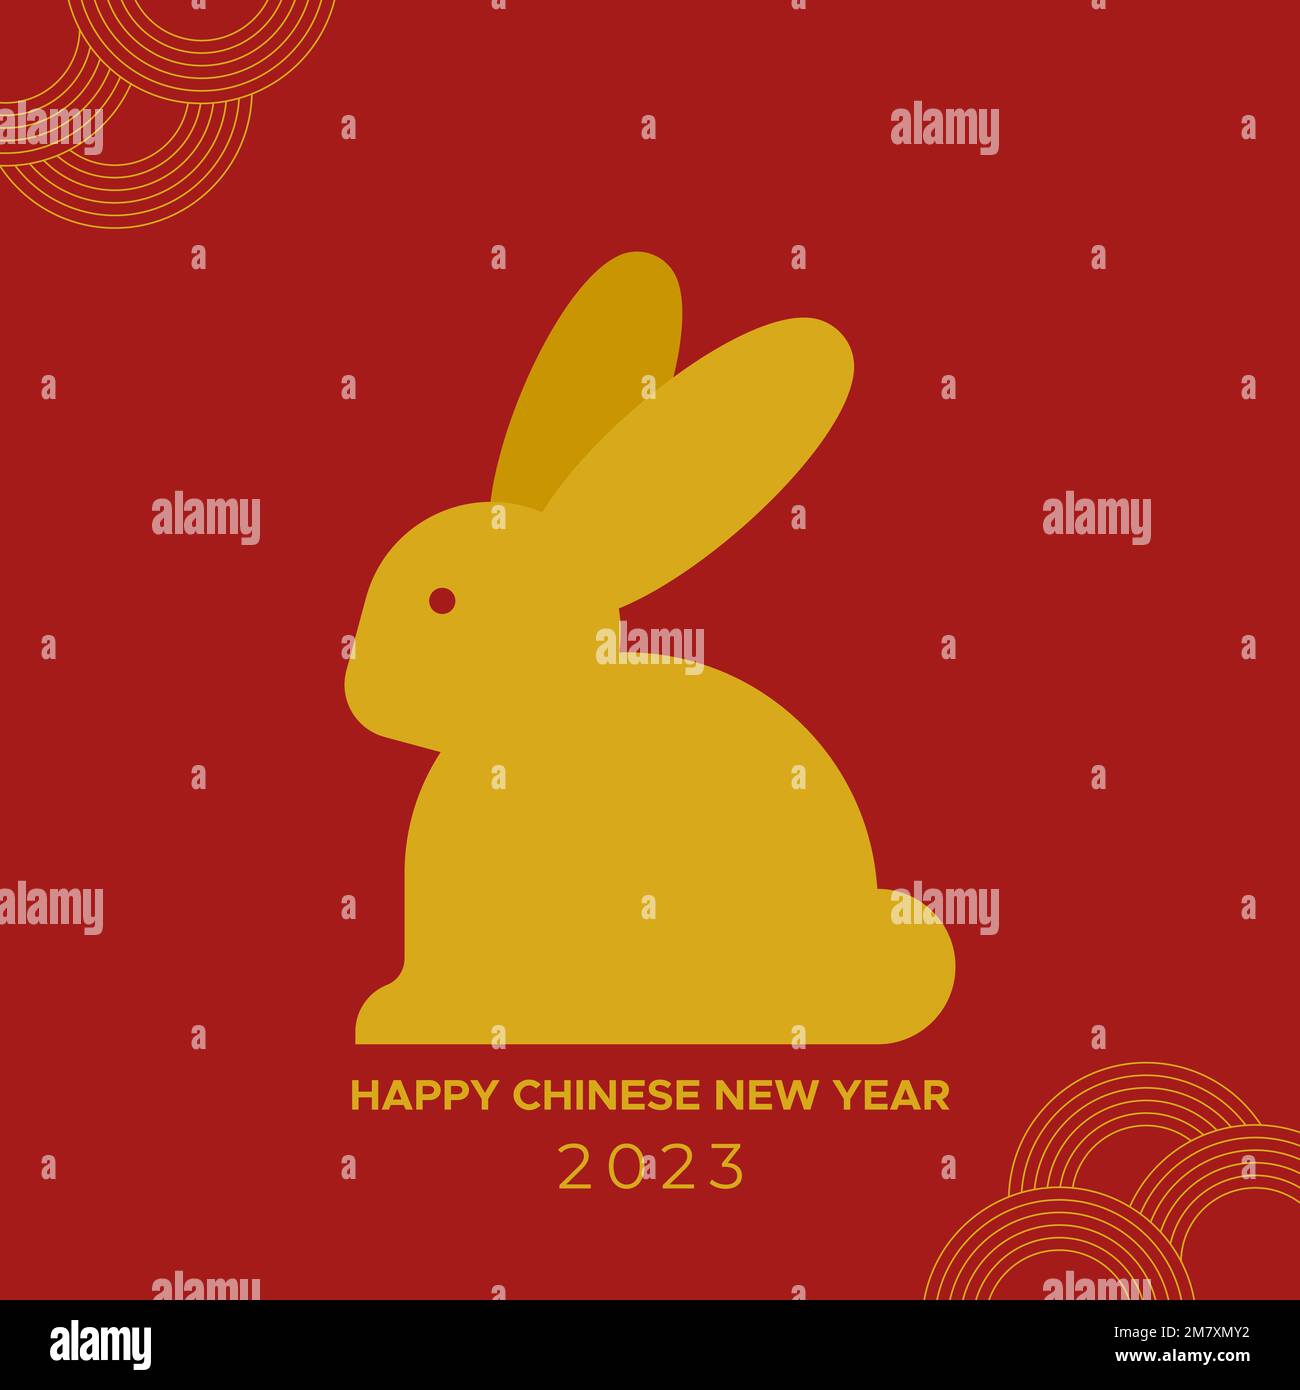 Happy Chinese New Year. Year of the rabbit. 2023. Vector illustration, flat design Stock Vector